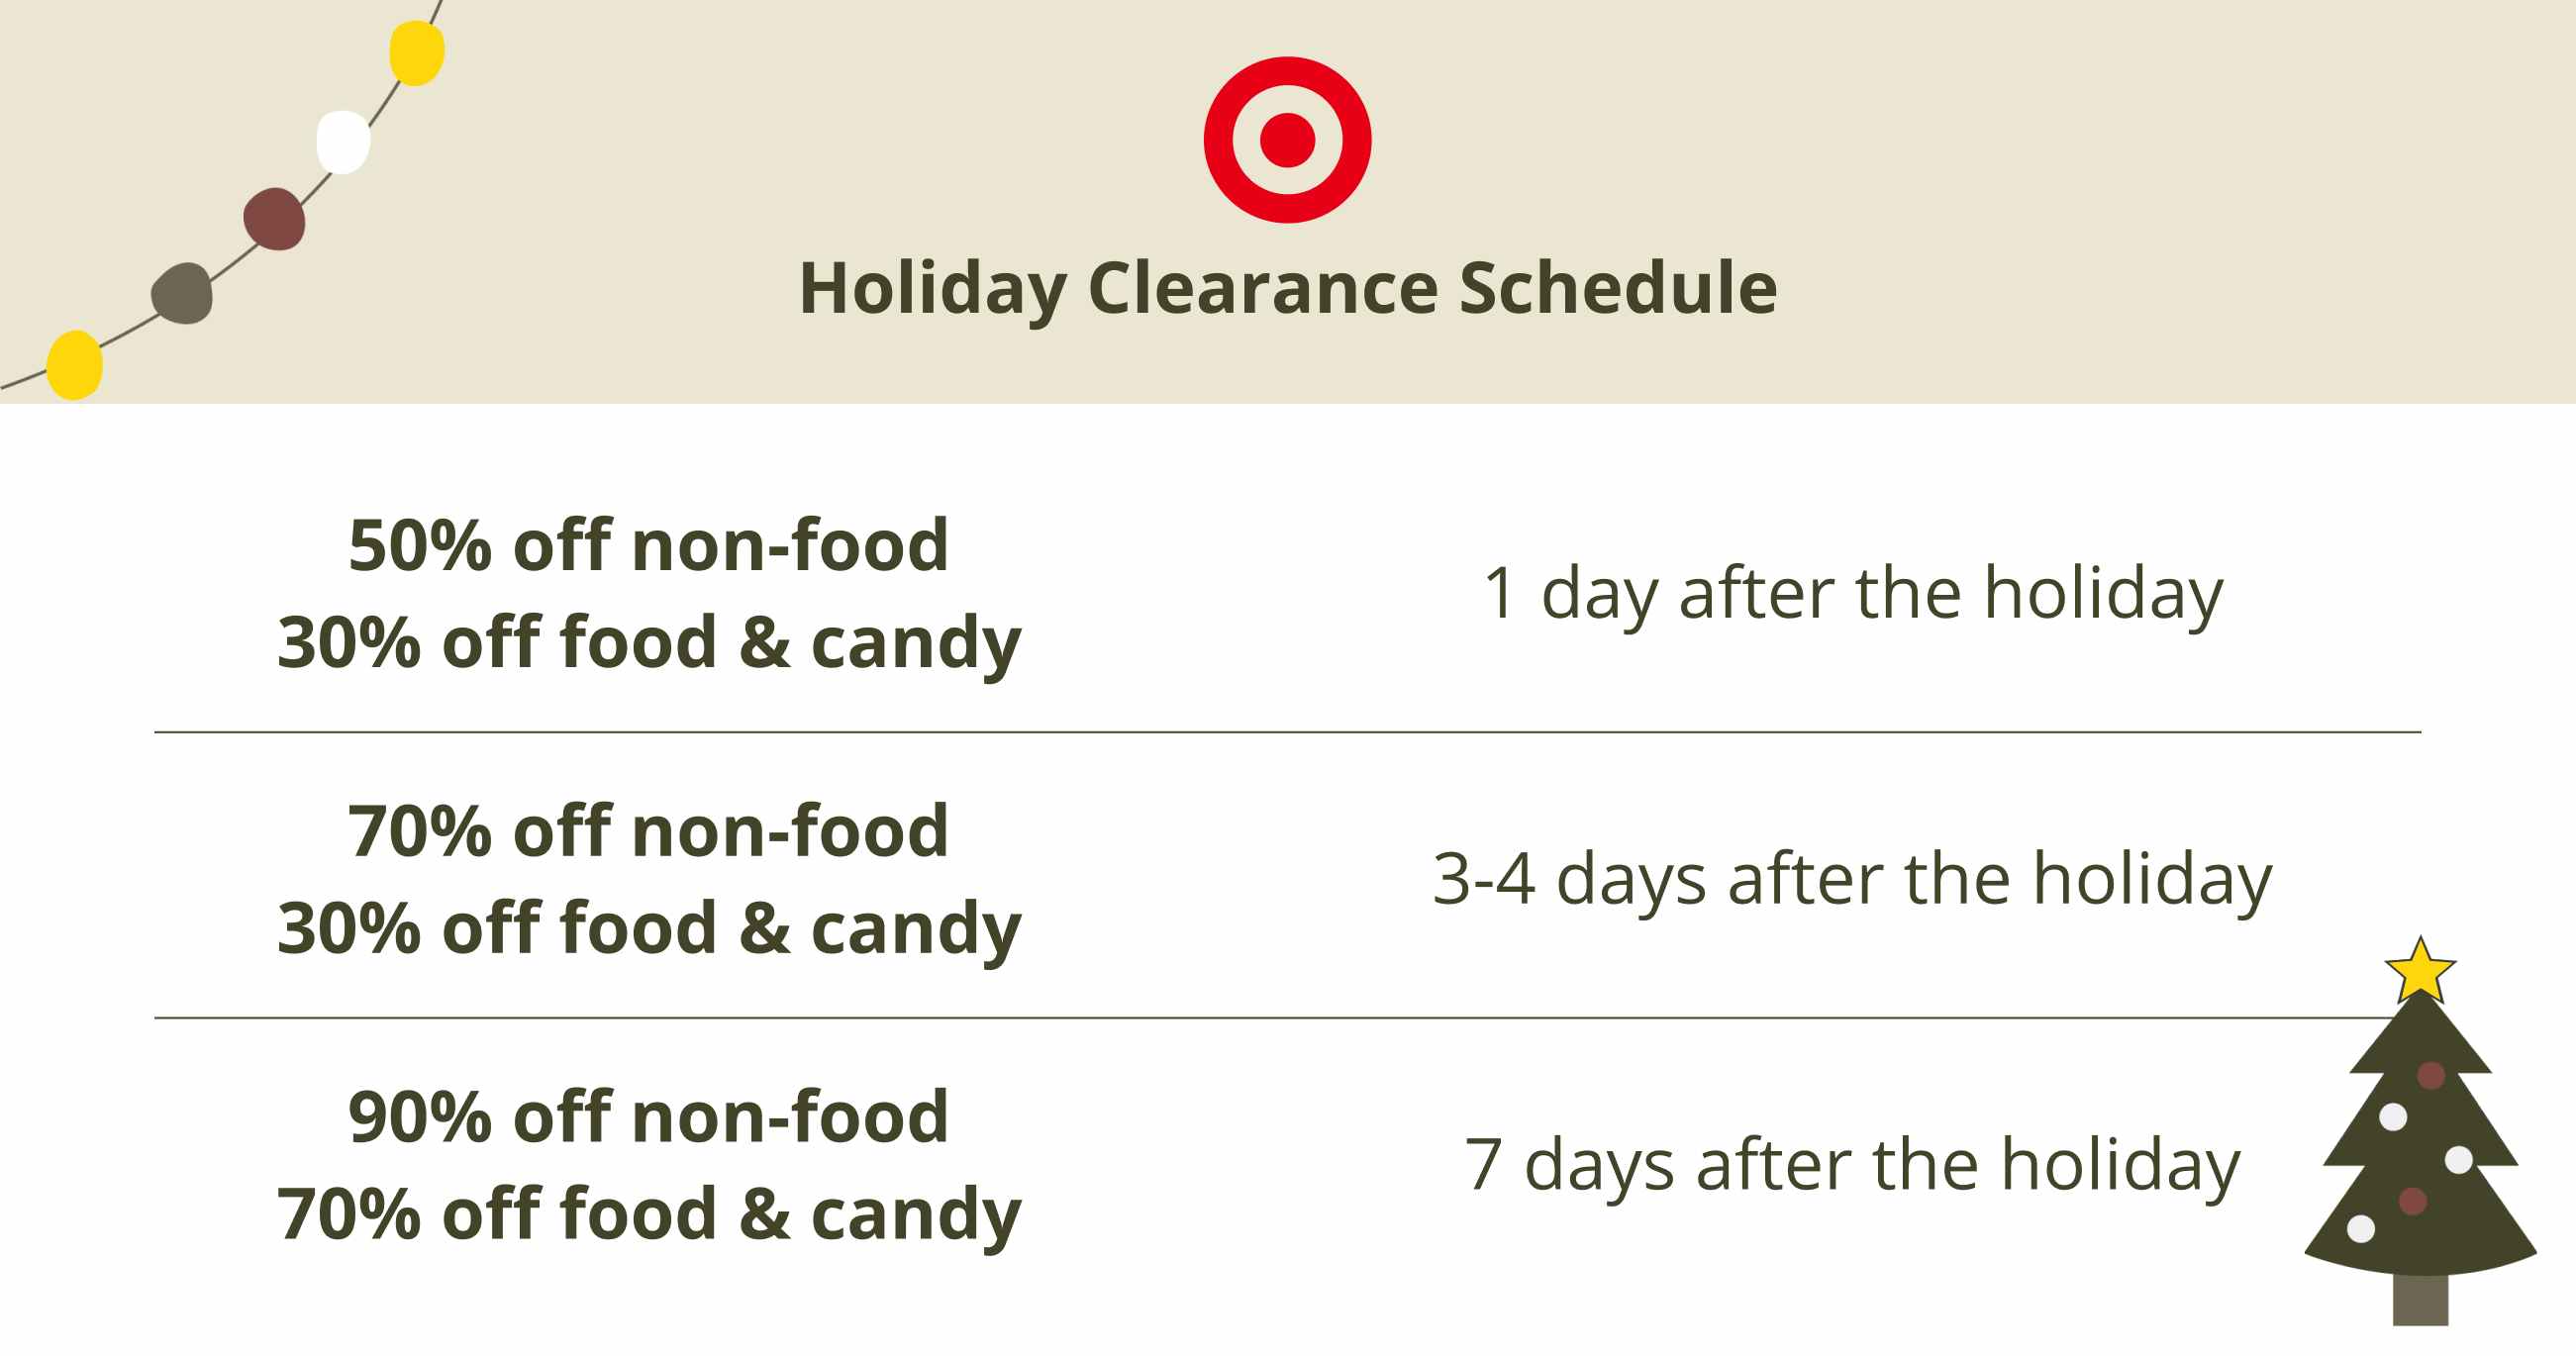 Target holiday clearance markdown schedule showing when seasonal clearance discounts happen. 1 day after the holiday: 30% off food, 50% off non-food. 3-4 days after the holiday: 50% off food, 70% off non-food. 7 days after the holiday: 70% off food, 90% off non-food.